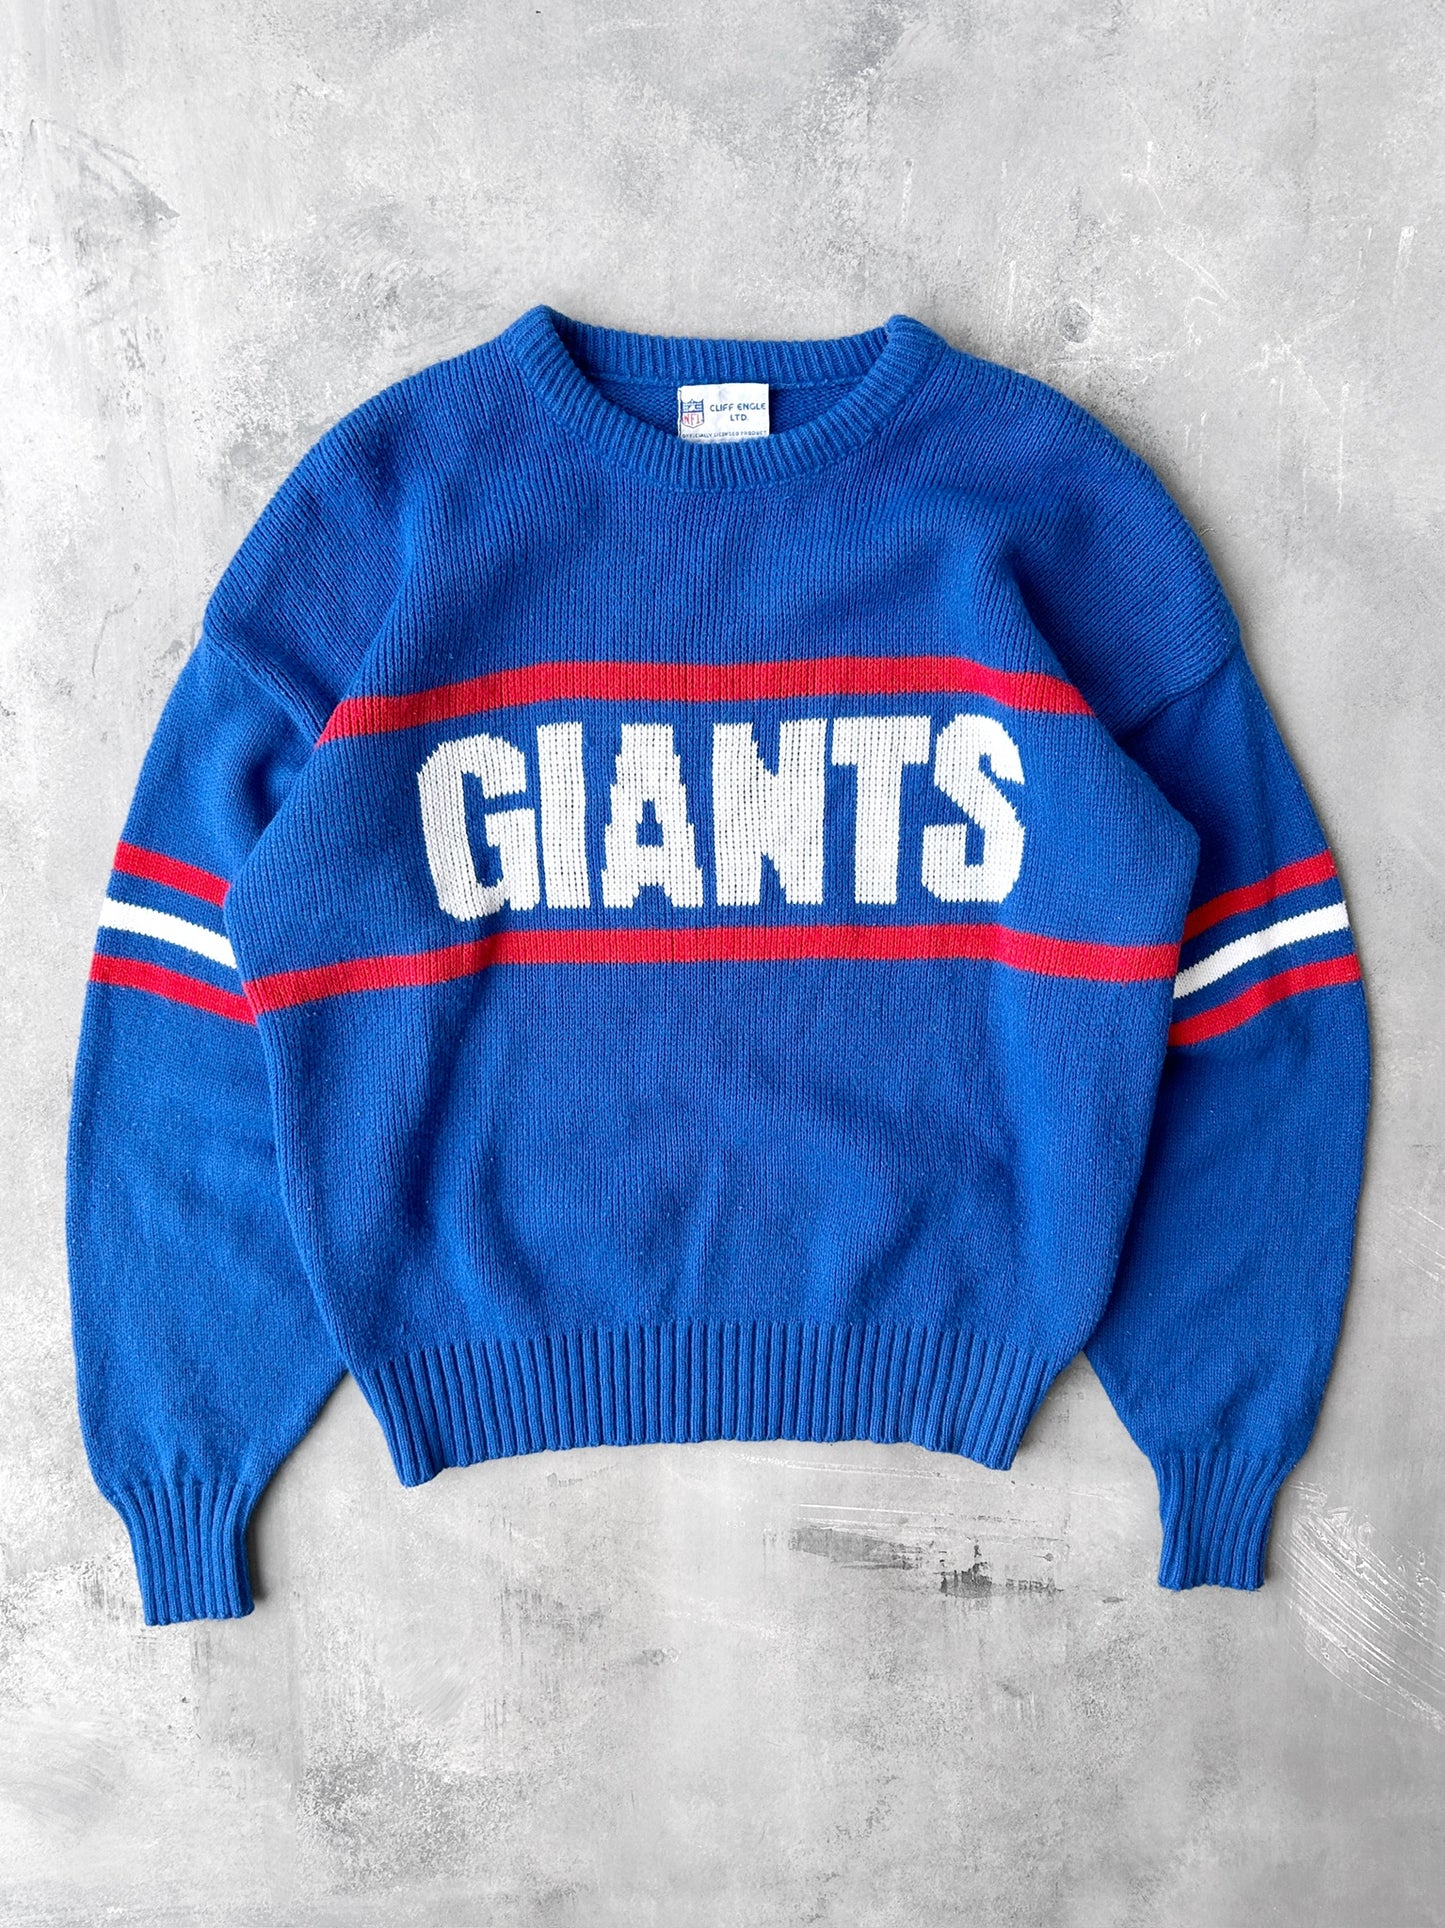 New York Giants Sweater 90's - Large